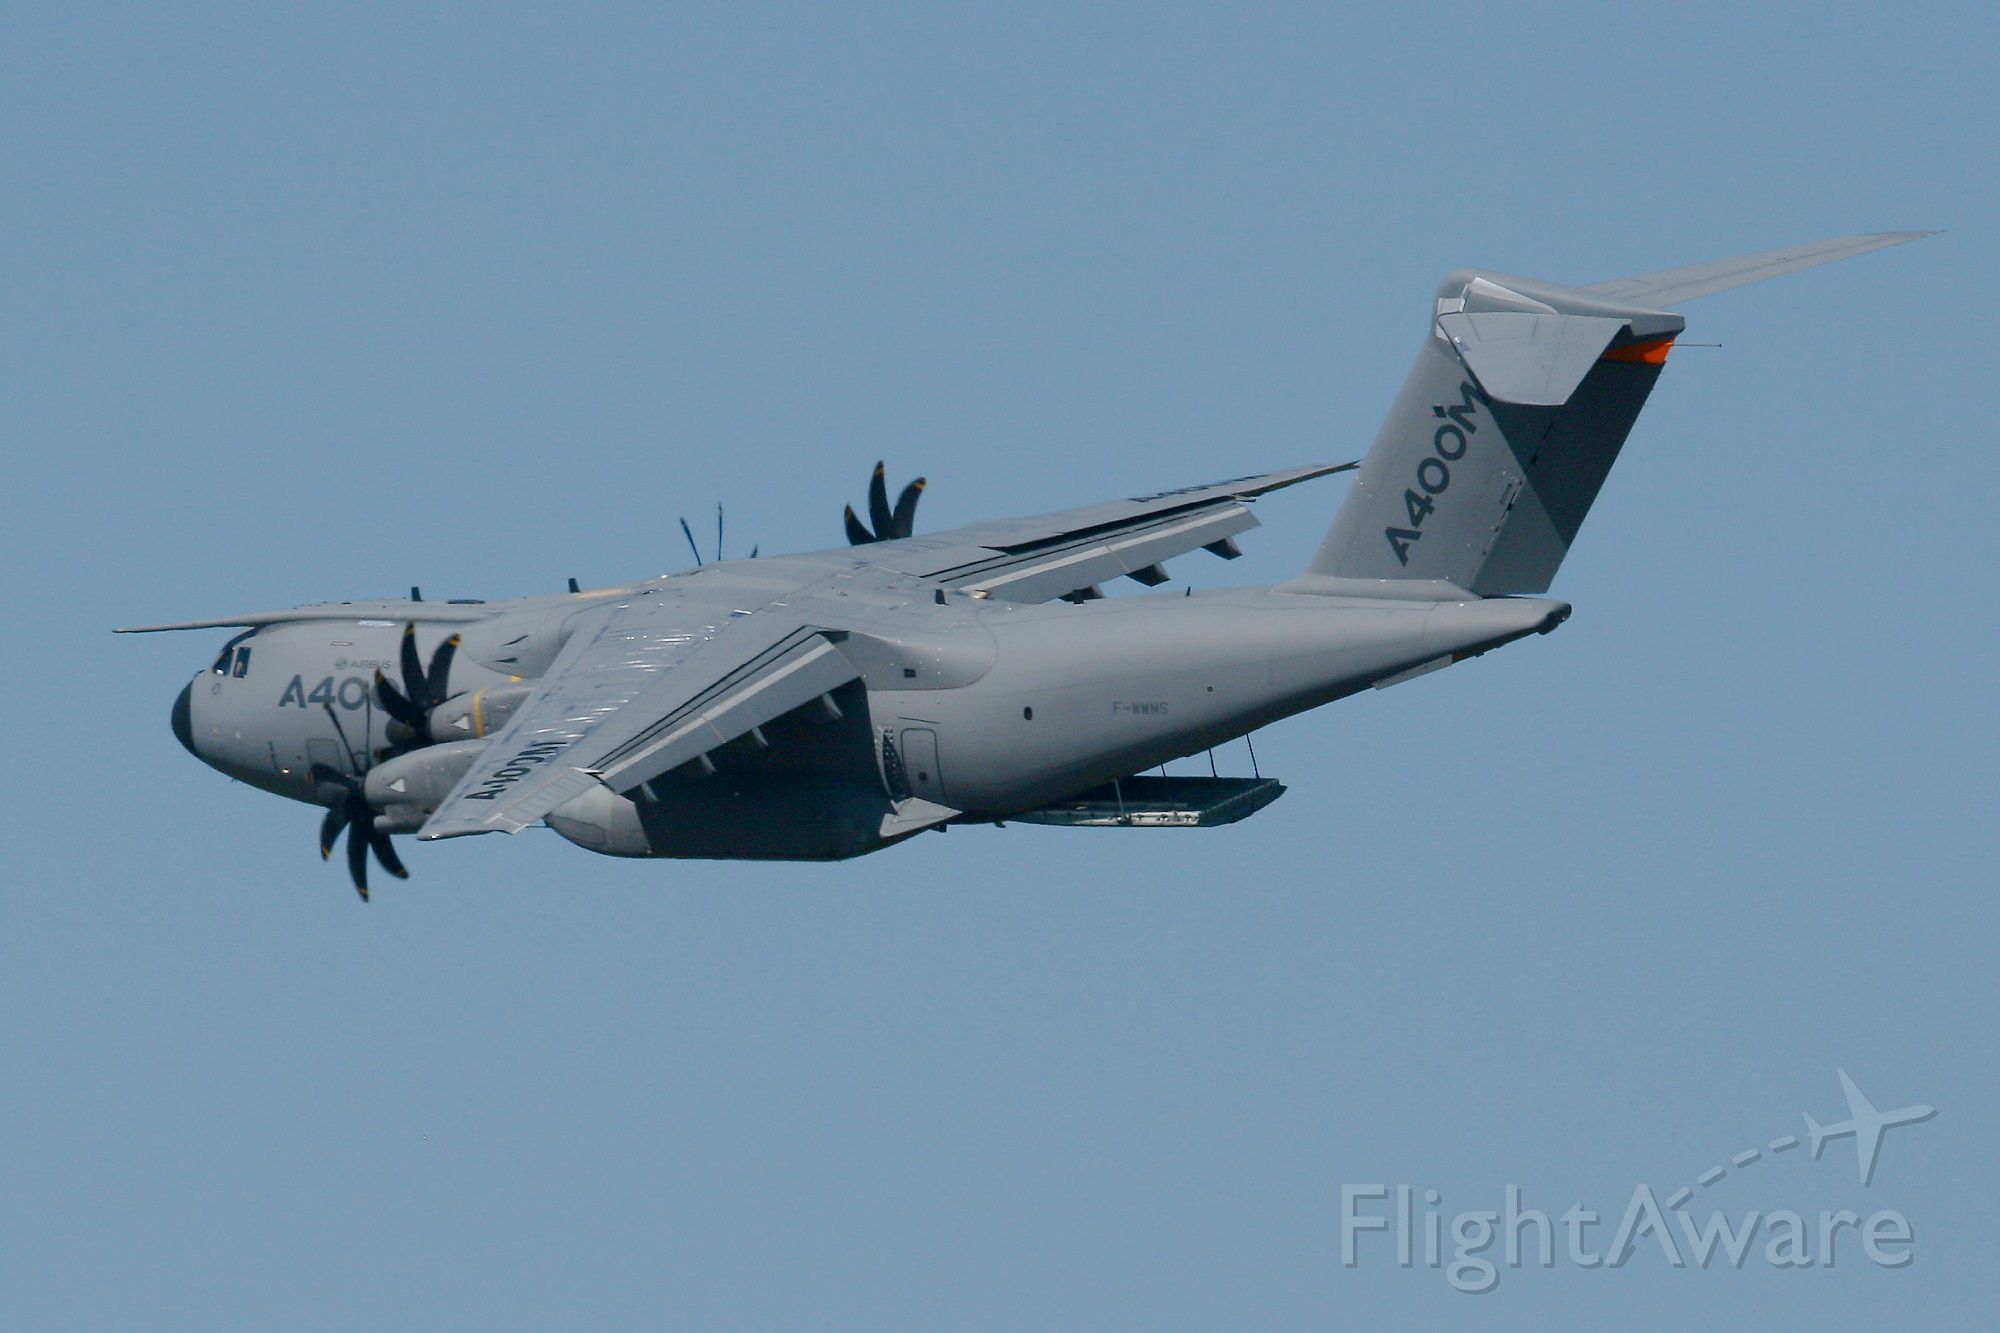 AIRBUS A-400M Atlas (F-WWMS) - Airbus Military A400M Atlas low height flight, Salon de Provence Air Base 701 (LFMY)